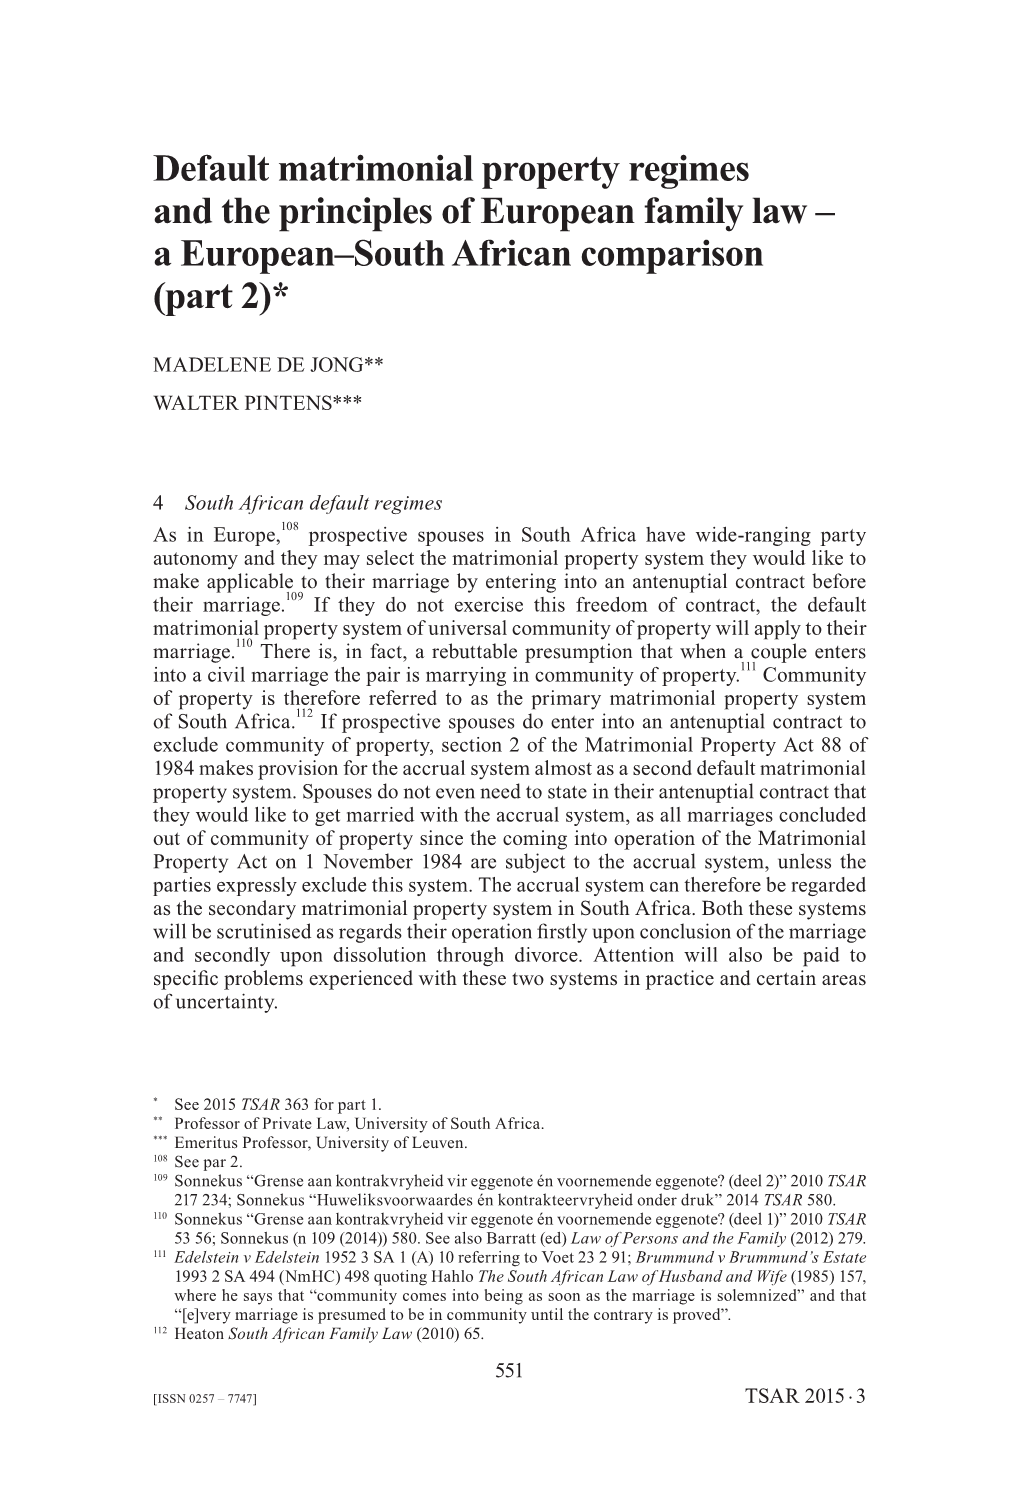 Matrimonial Property Regimes and the Principles of European Family Law – a European–South African Comparison (Part 2)*